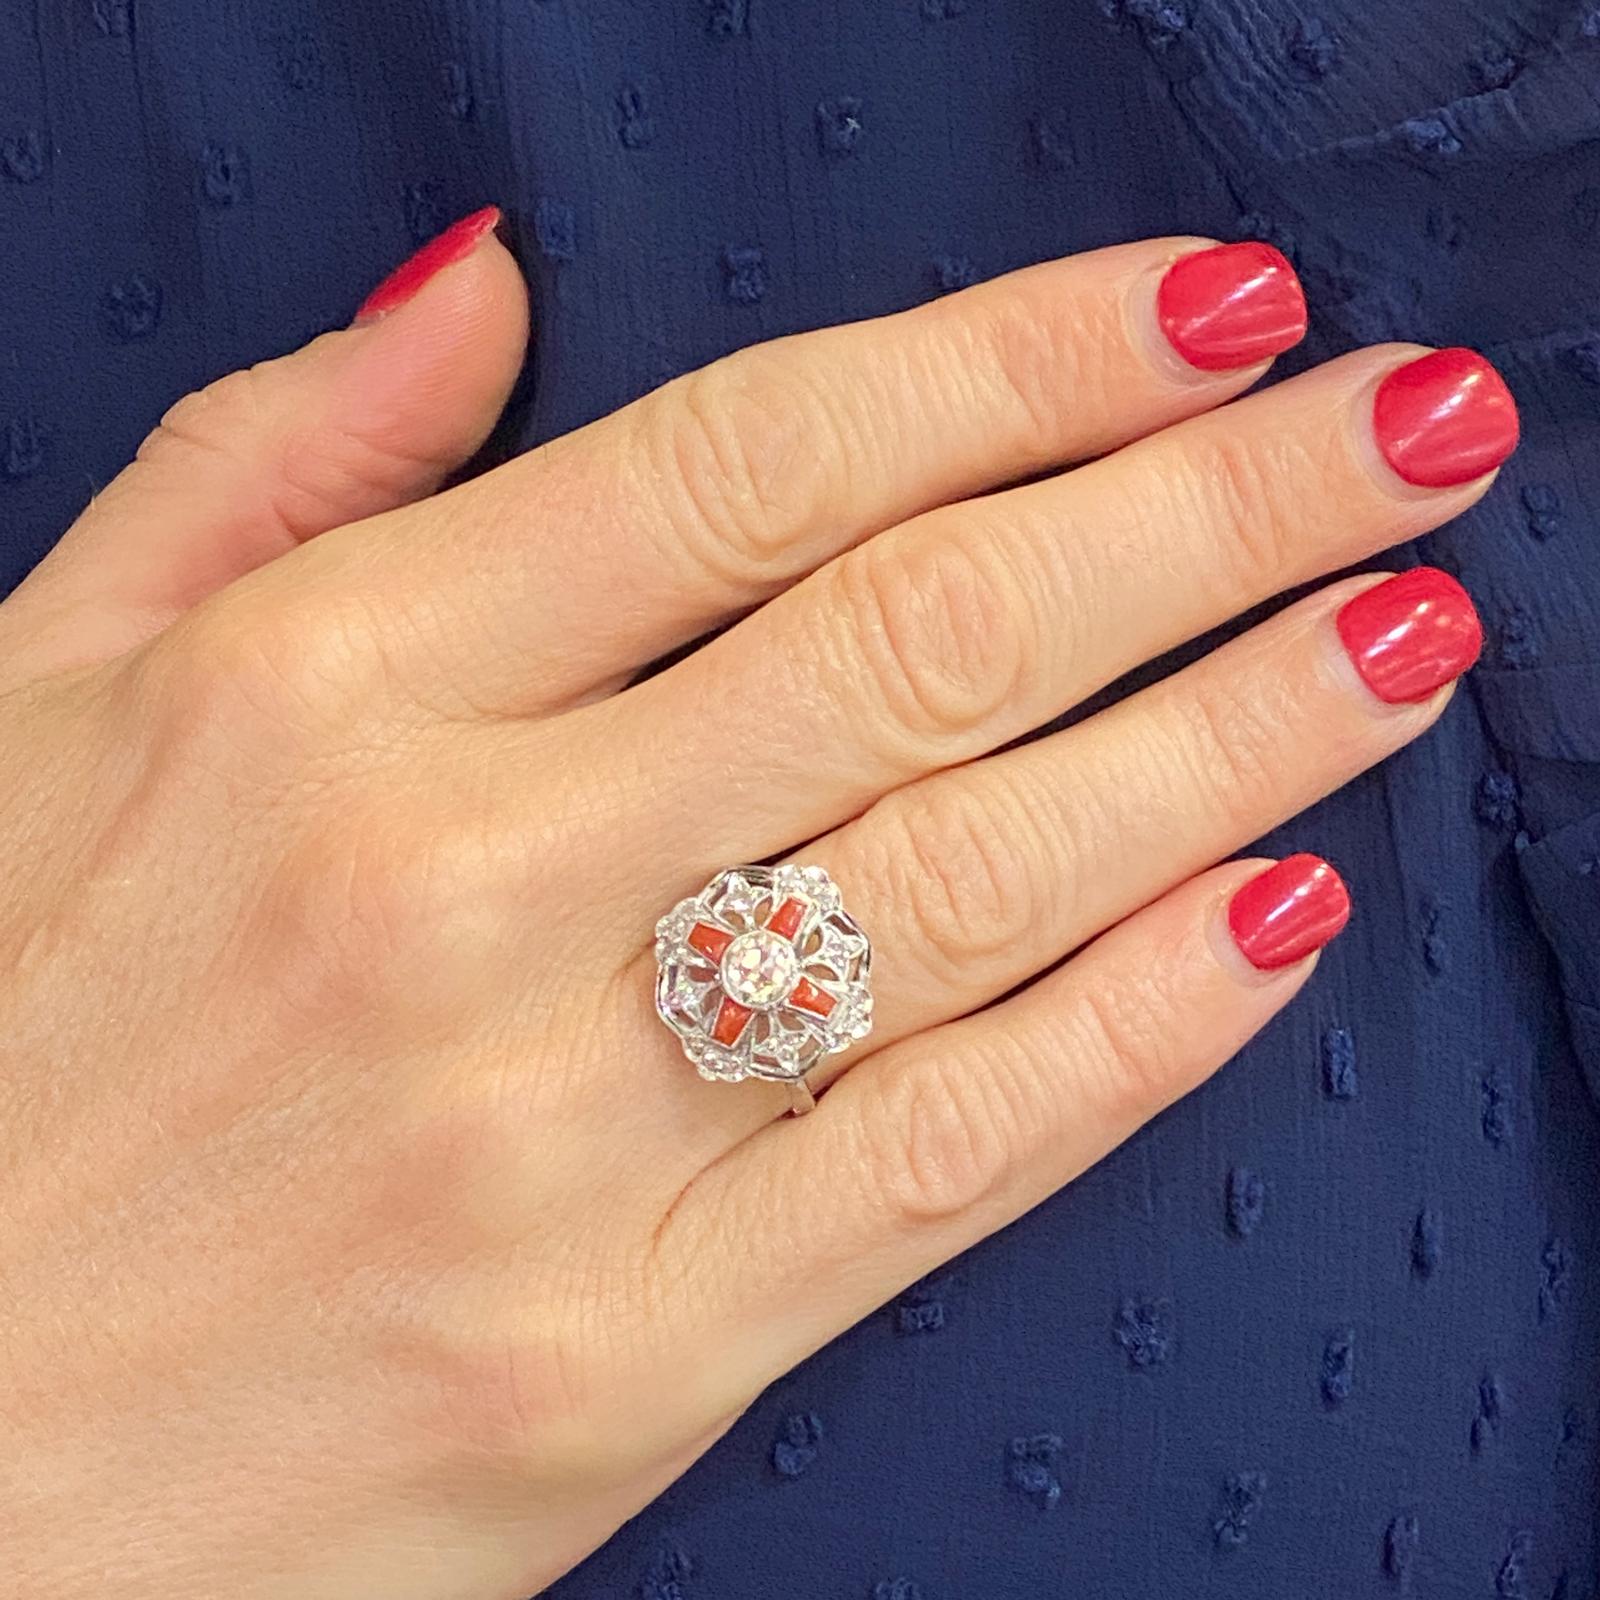 Original Art Deco Diamond and Coral Ring handcrafted in platinum. The filigree ring features a center .50 carat old European cut diamond, another .20 carat total weight of side diamonds, and 4 coral accents. The ring is currently size 7 (can be